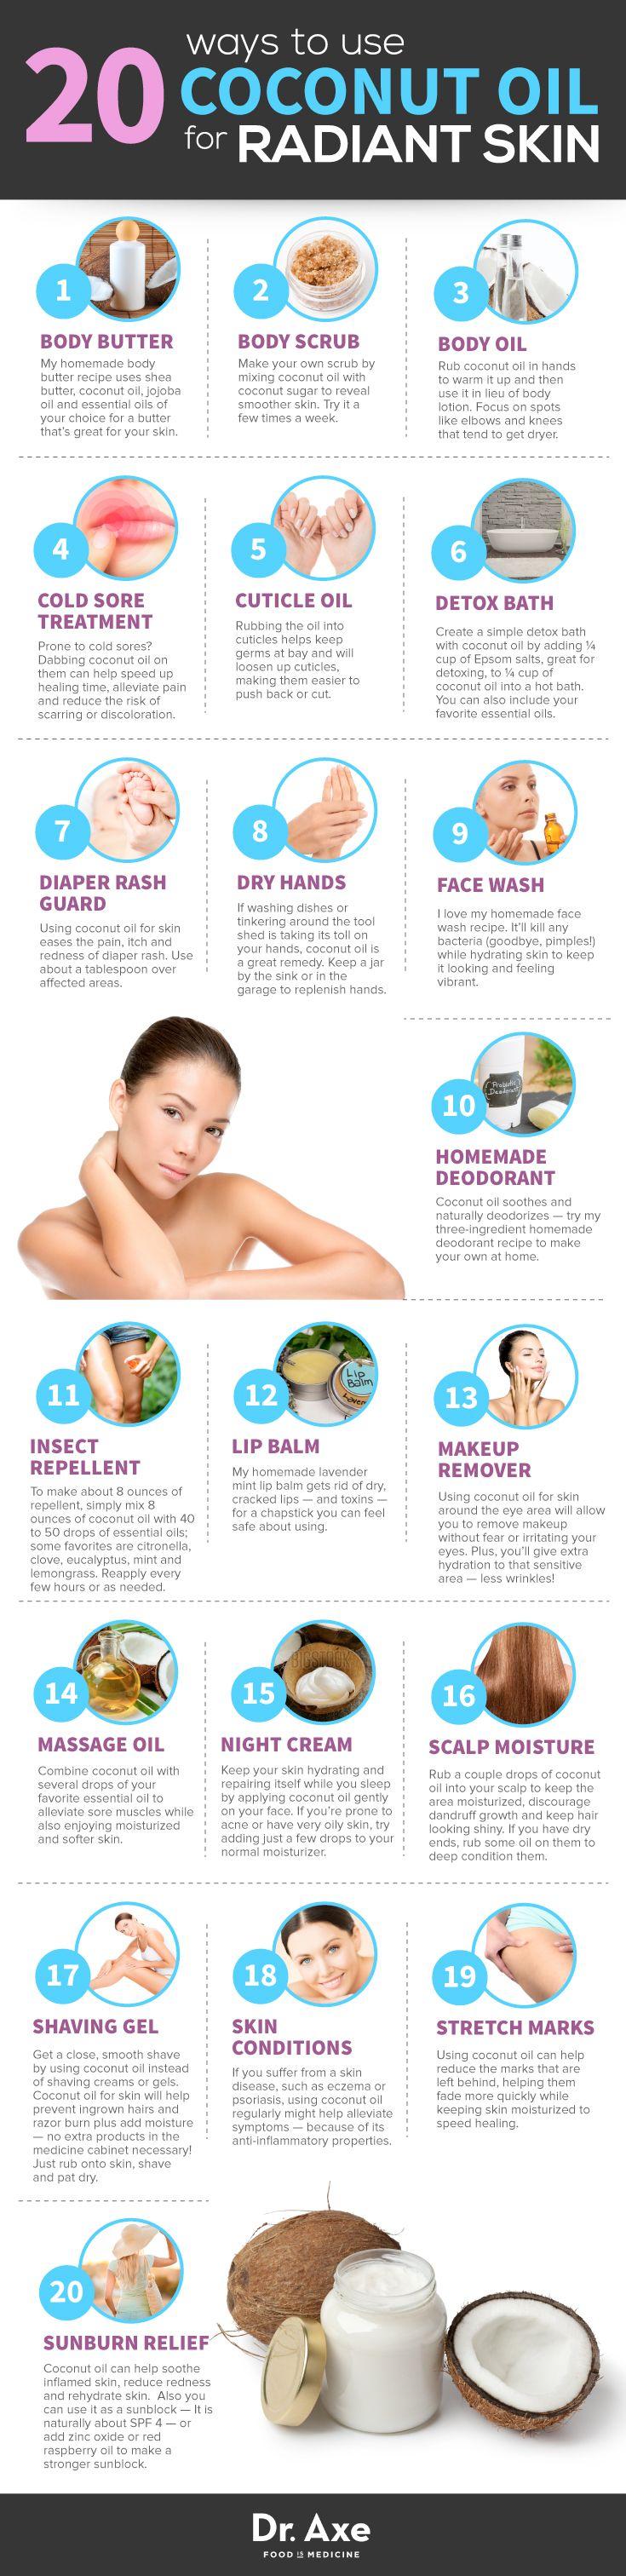 Hochzeit - 20 Secret Ways To Use Coconut Oil For Skin - Dr. Axe